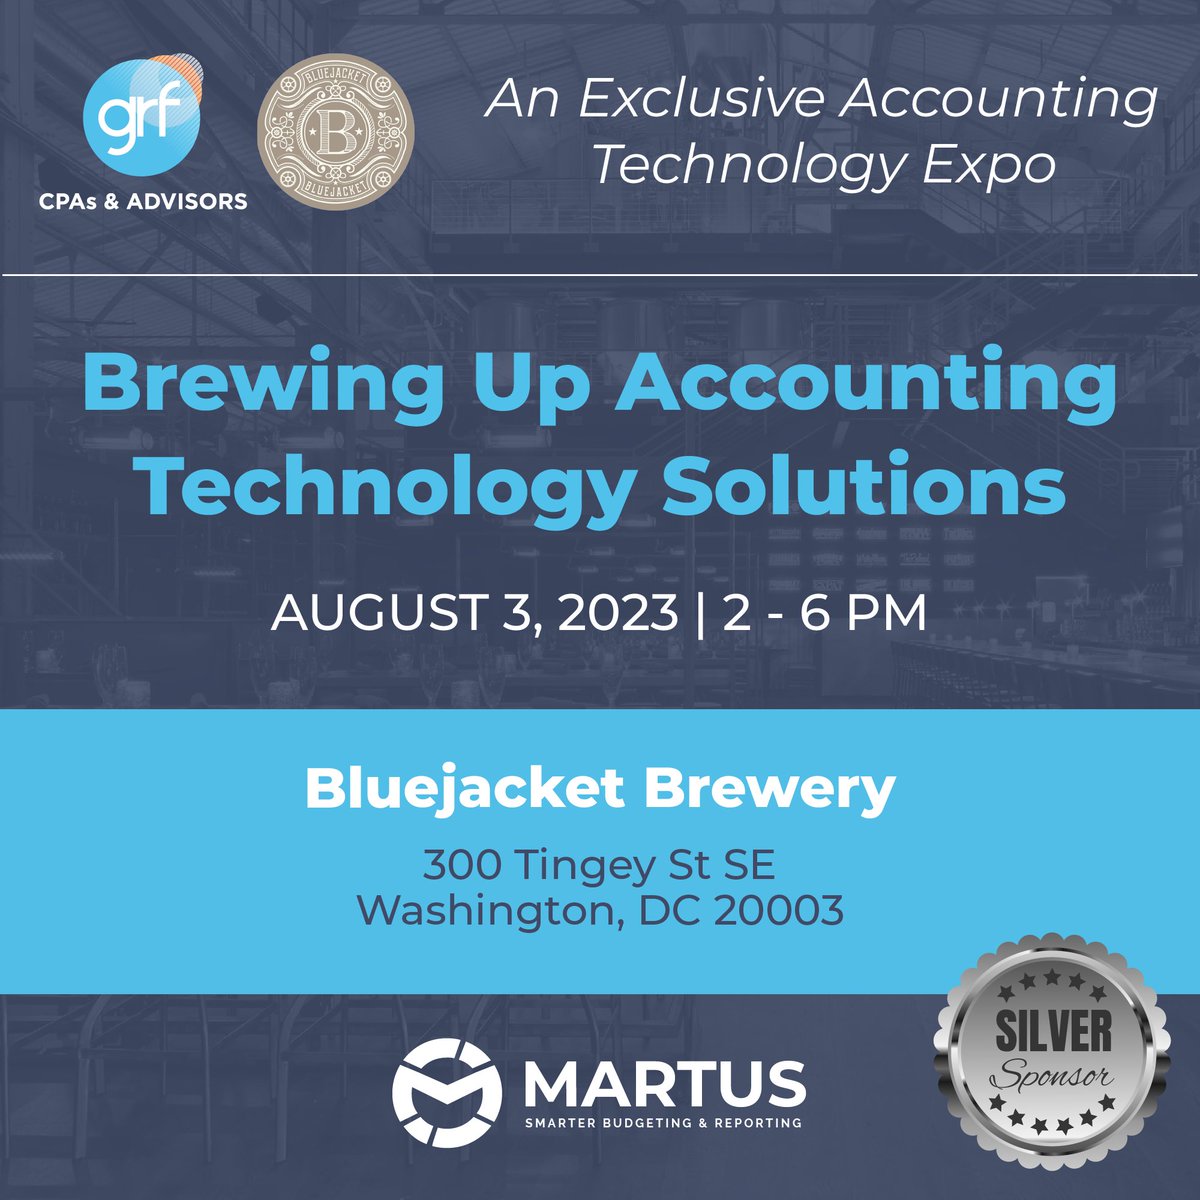 Martus will be Silver Sponsors at the @GRFCPAs Brewing Up Accounting Technology Solutions event at Bluejacket Brewery! 🍻 This is a great opportunity to see how tech like Martus #Budgeting can help your organizations thrive. Check out the event: bit.ly/3rM30GF